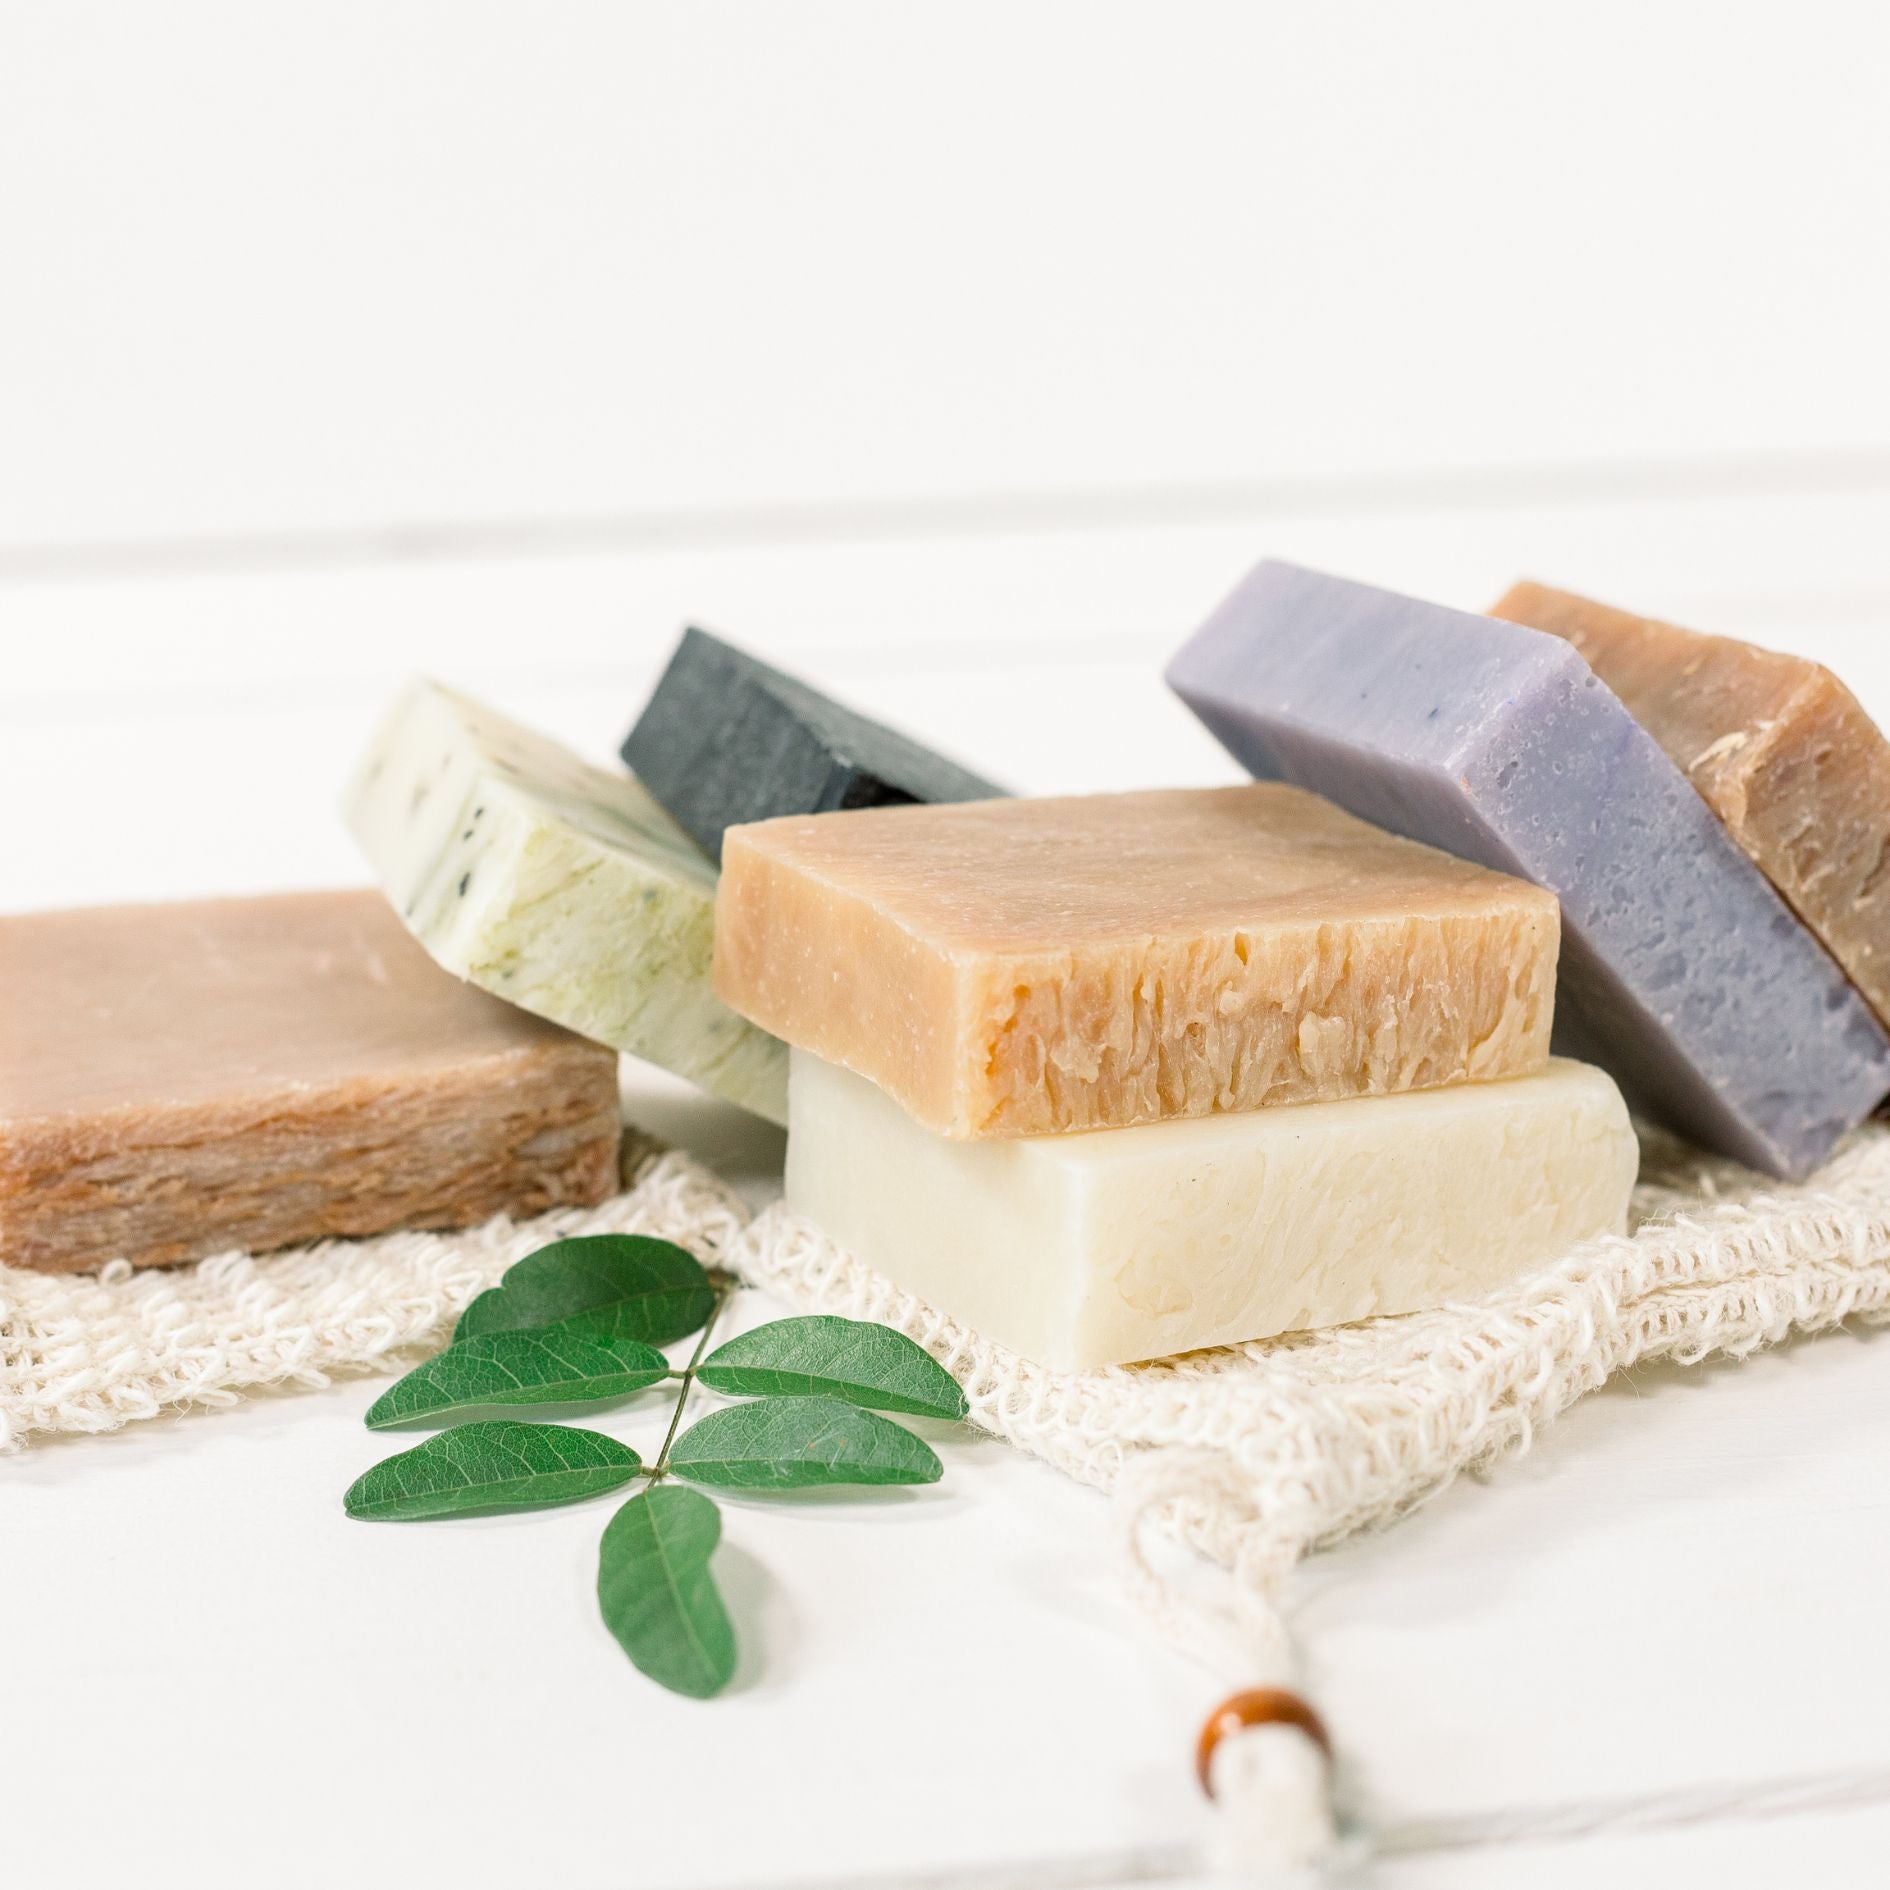 SOAP OF THE MONTH CLUB SUBSCRIPTION BOX